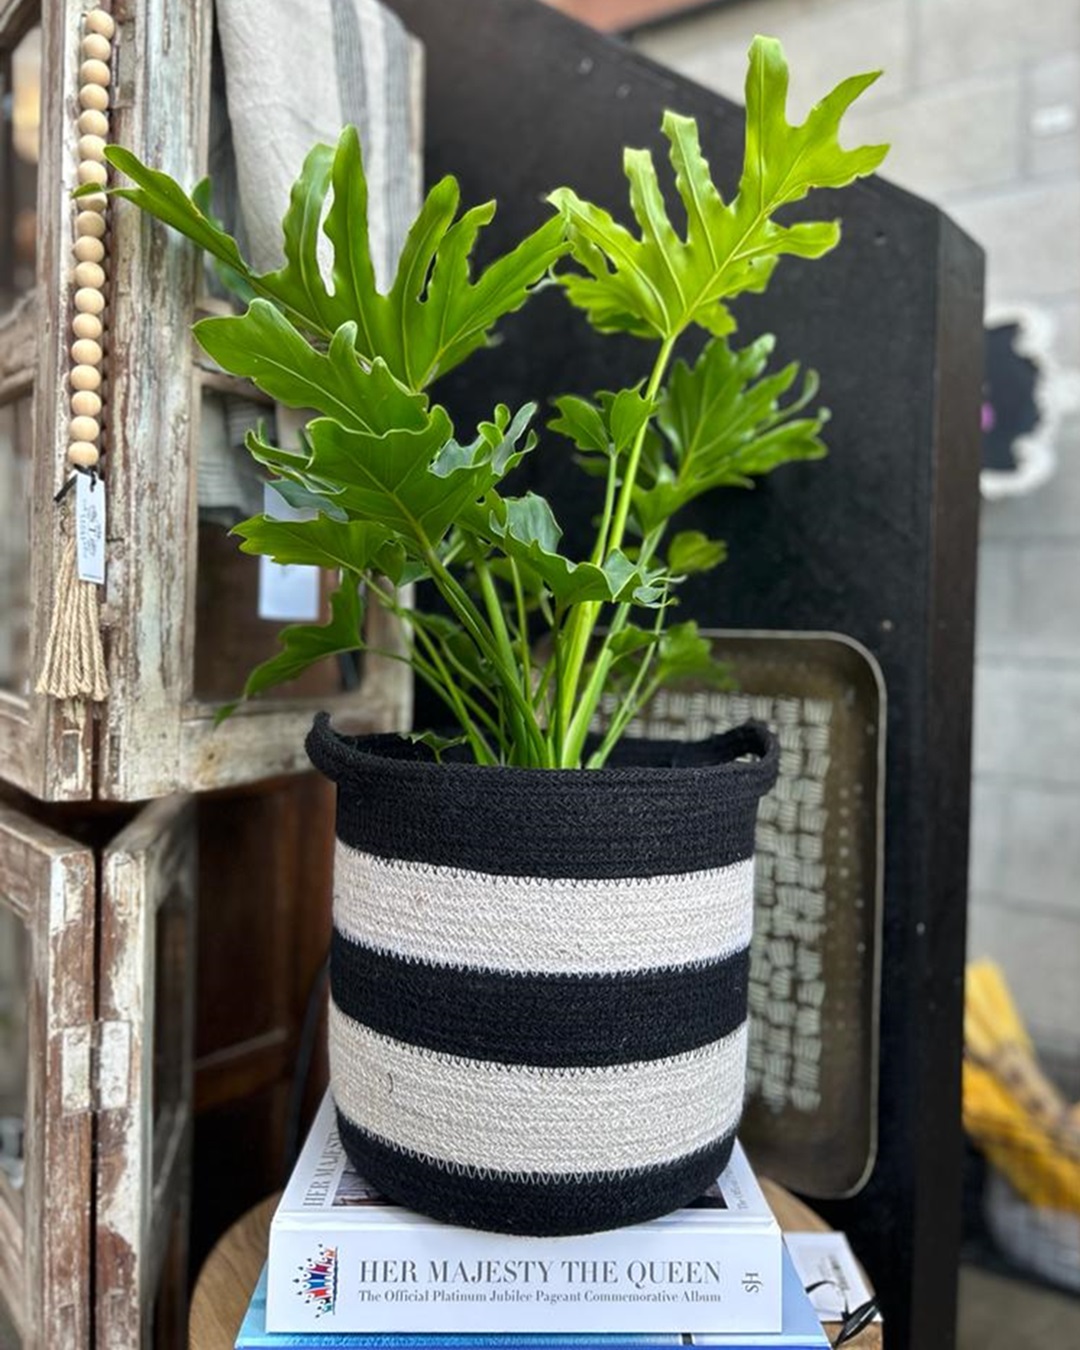 Black and white stripe jute basket with plant inside